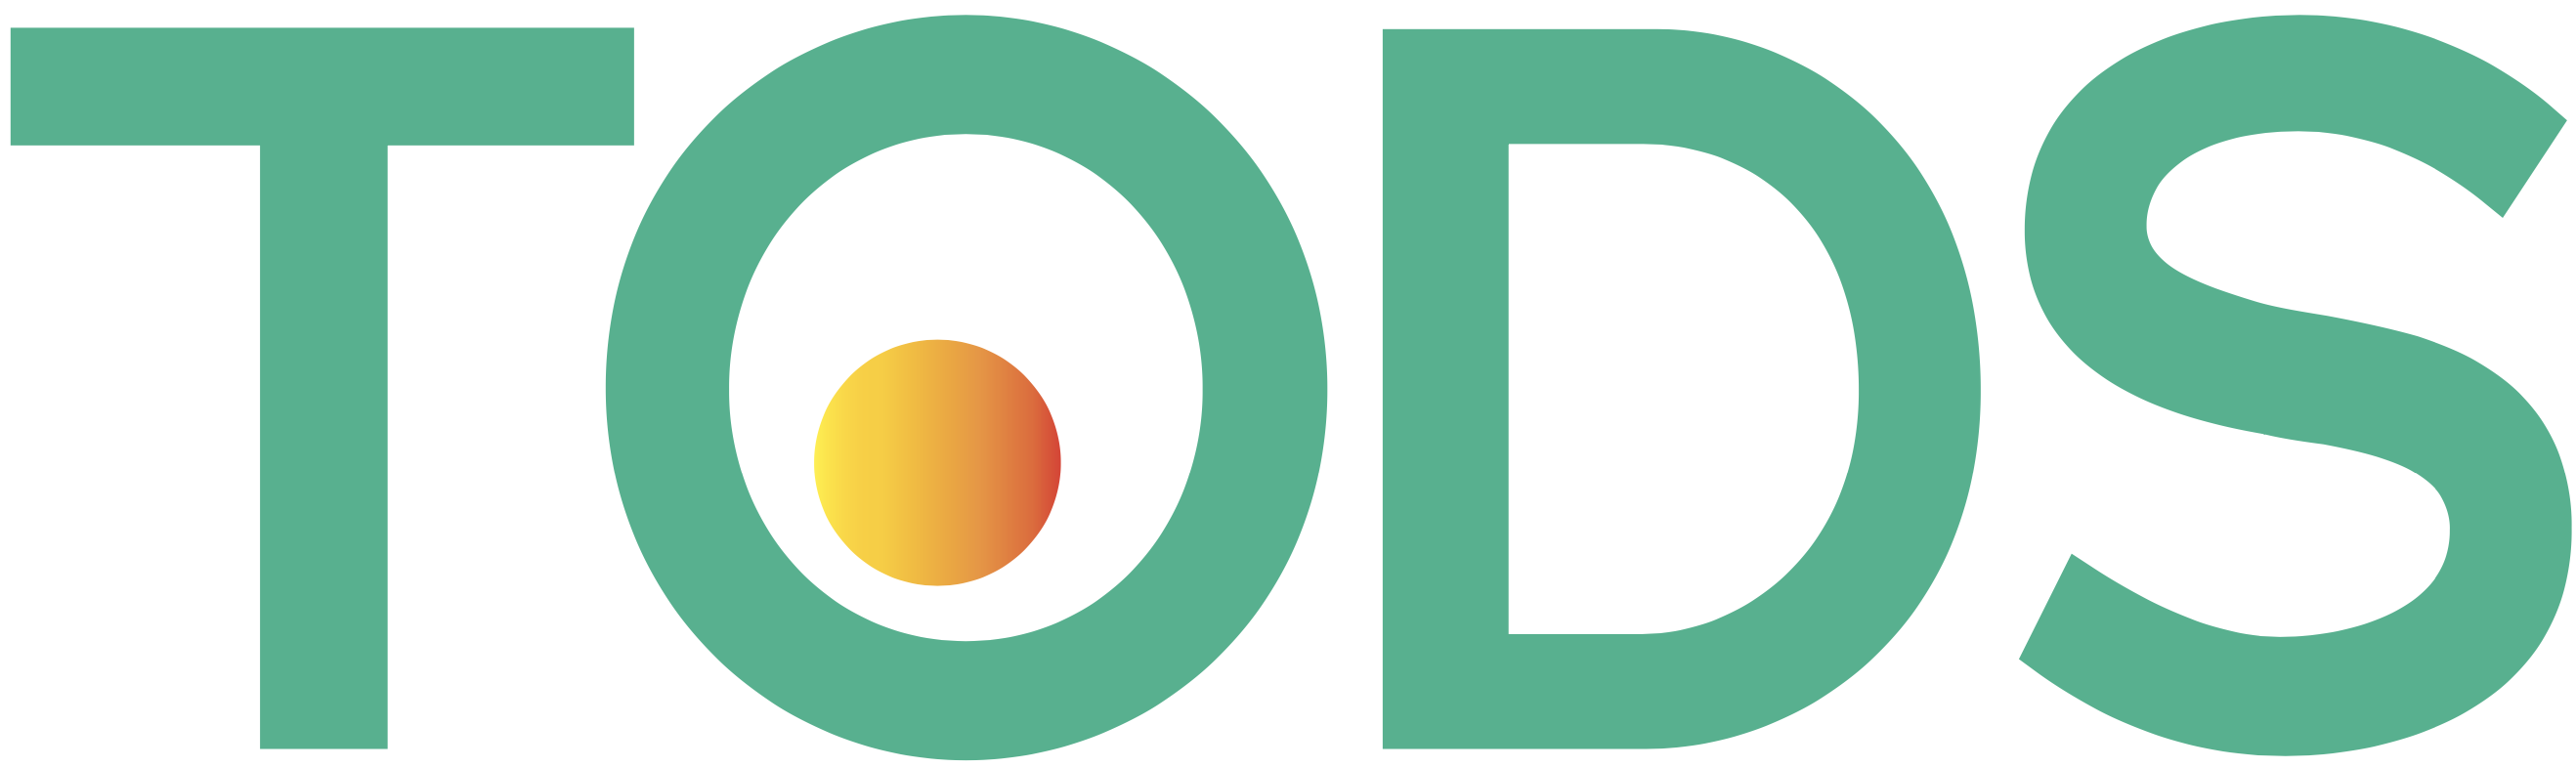 tods_logo.png